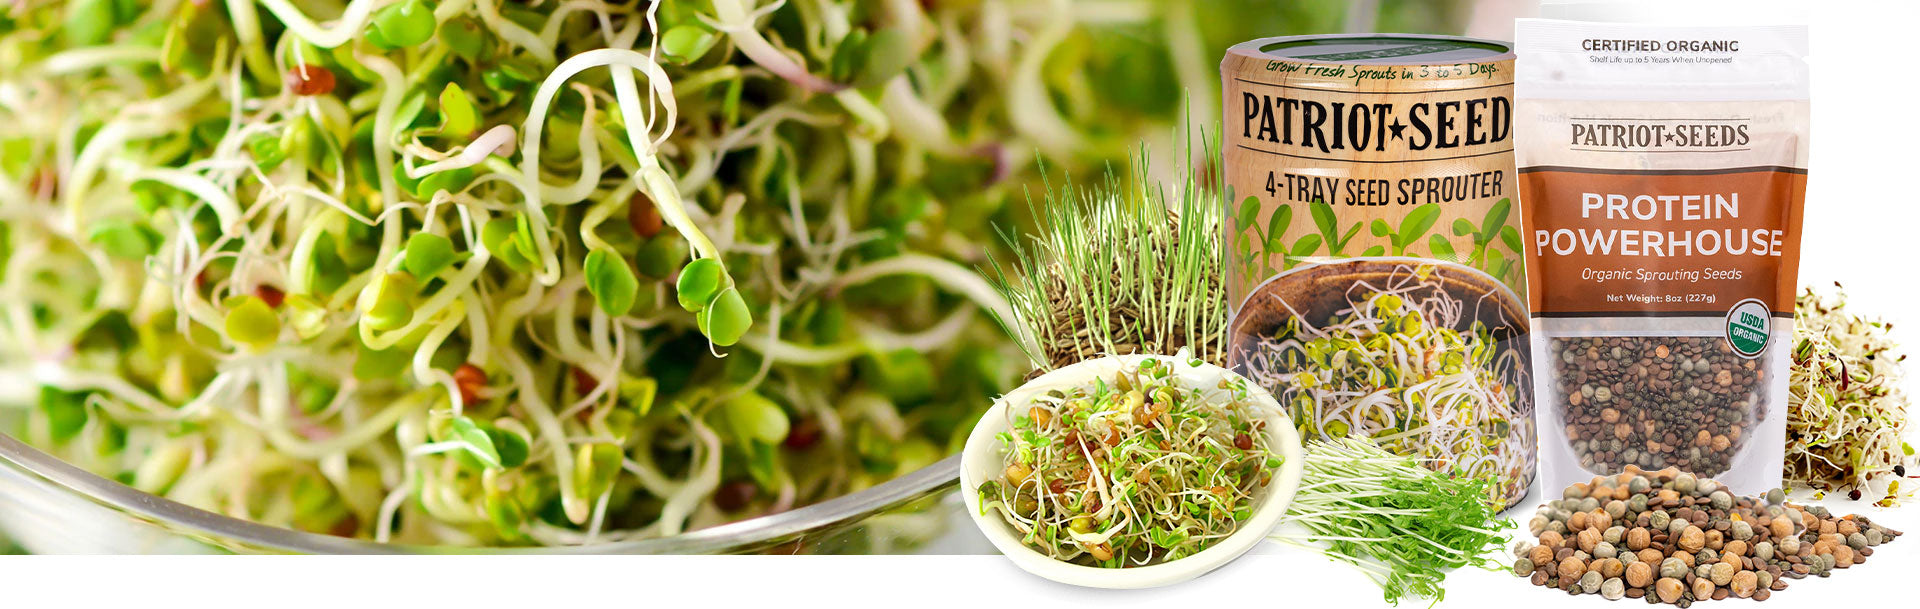 Sprouting Seeds & Microgreens - potent sources of many vitamins, minerals, amino acids